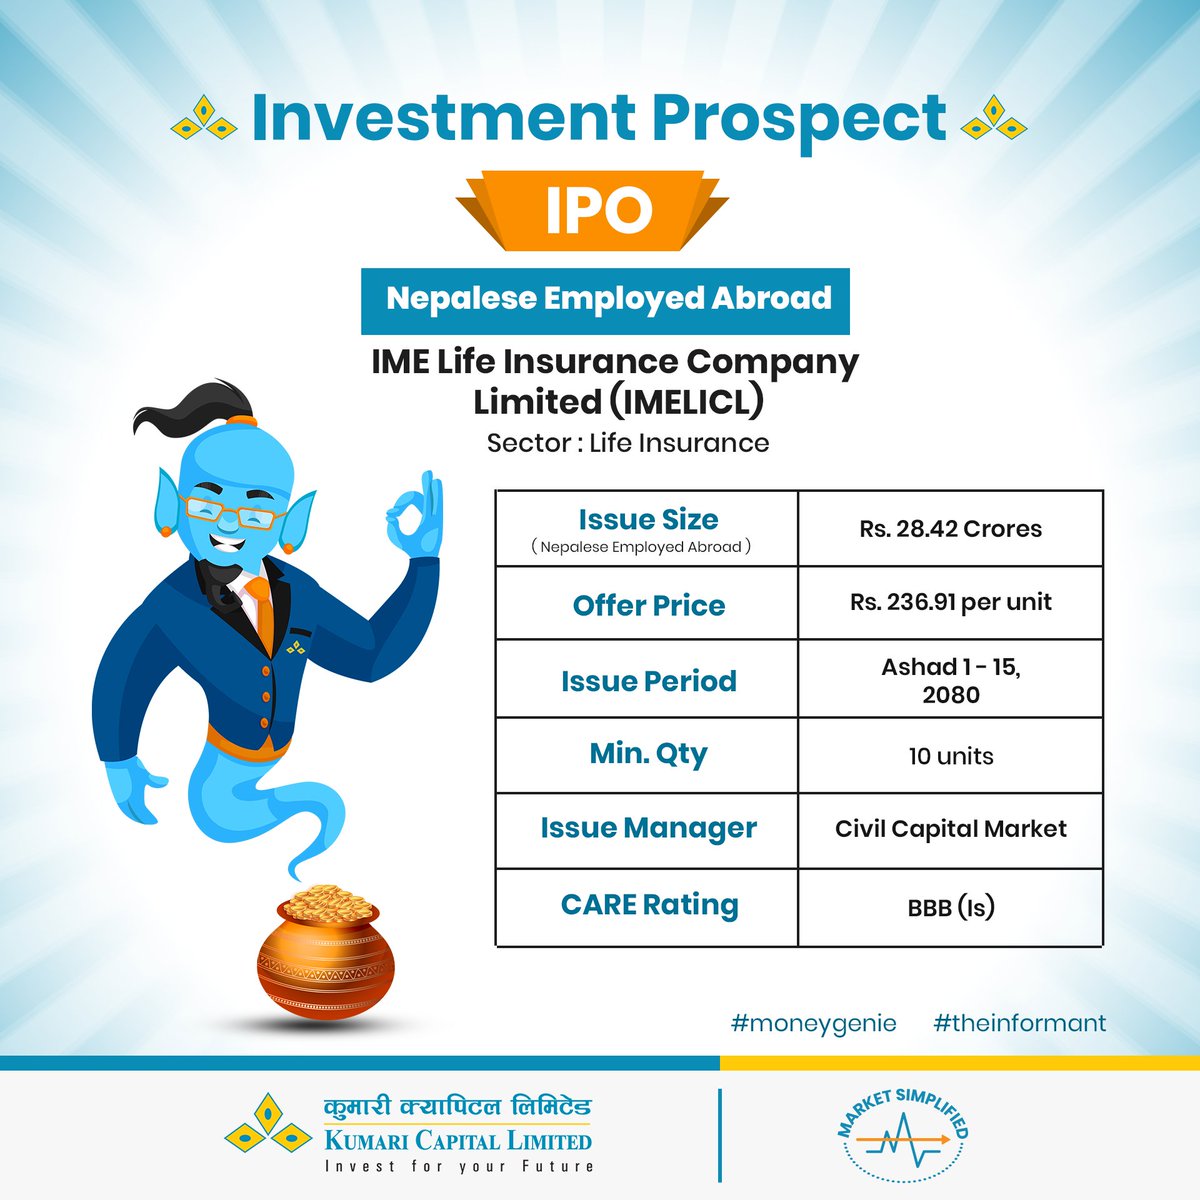 Investment Prospect: IPO for Nepalese Employed Abroad Alert!!!
IPO of IME Life Insurance Company Limited(IMELICL) has been opened to Nepalese people employed abroad with secured work authorization from the Ministry of Labour from today.